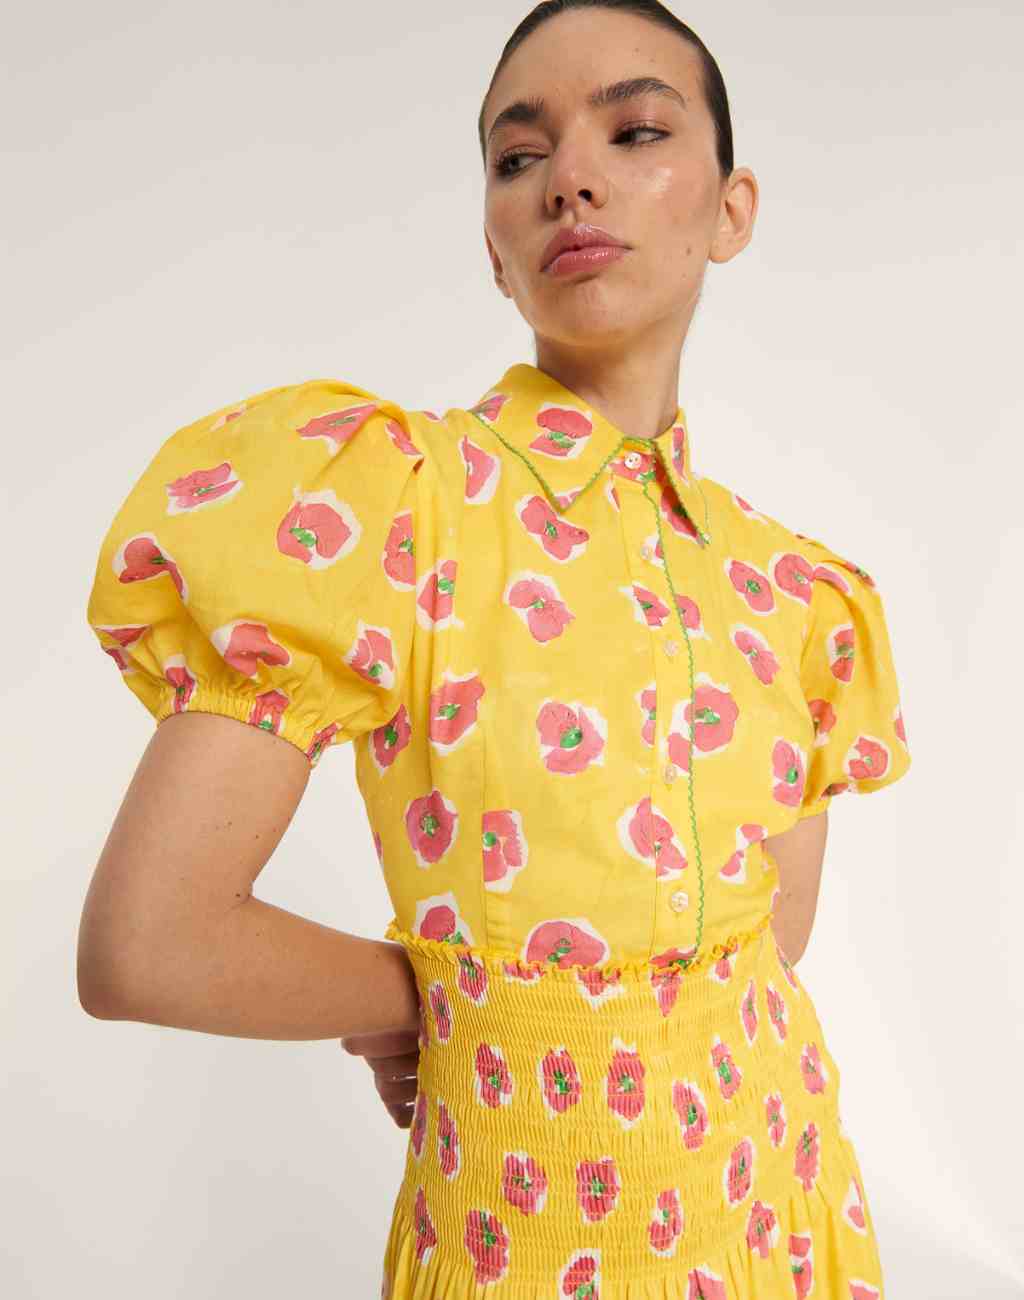 Begonia Print Mote Dress with Puffed Sleeves and Shirred Waist